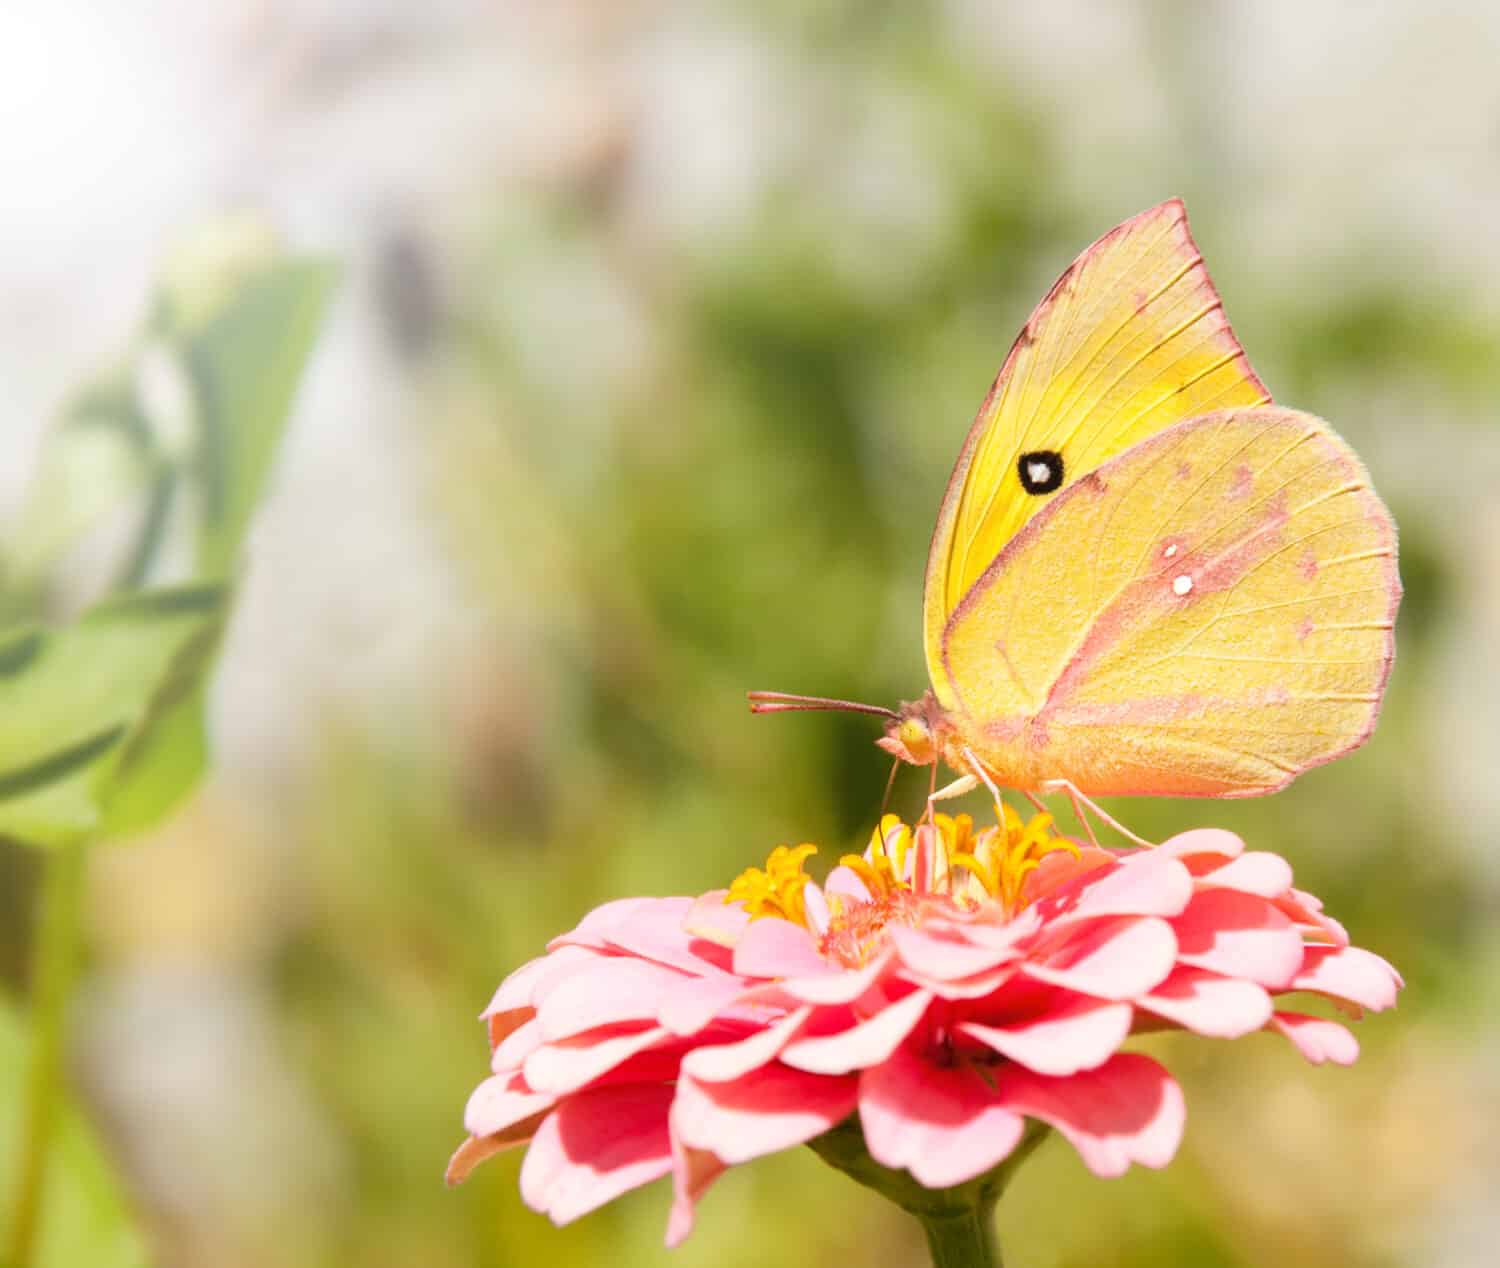 Beautiful Southern Dogface butterfly, Colias cesonia, feeding on a pink Zinnia flower